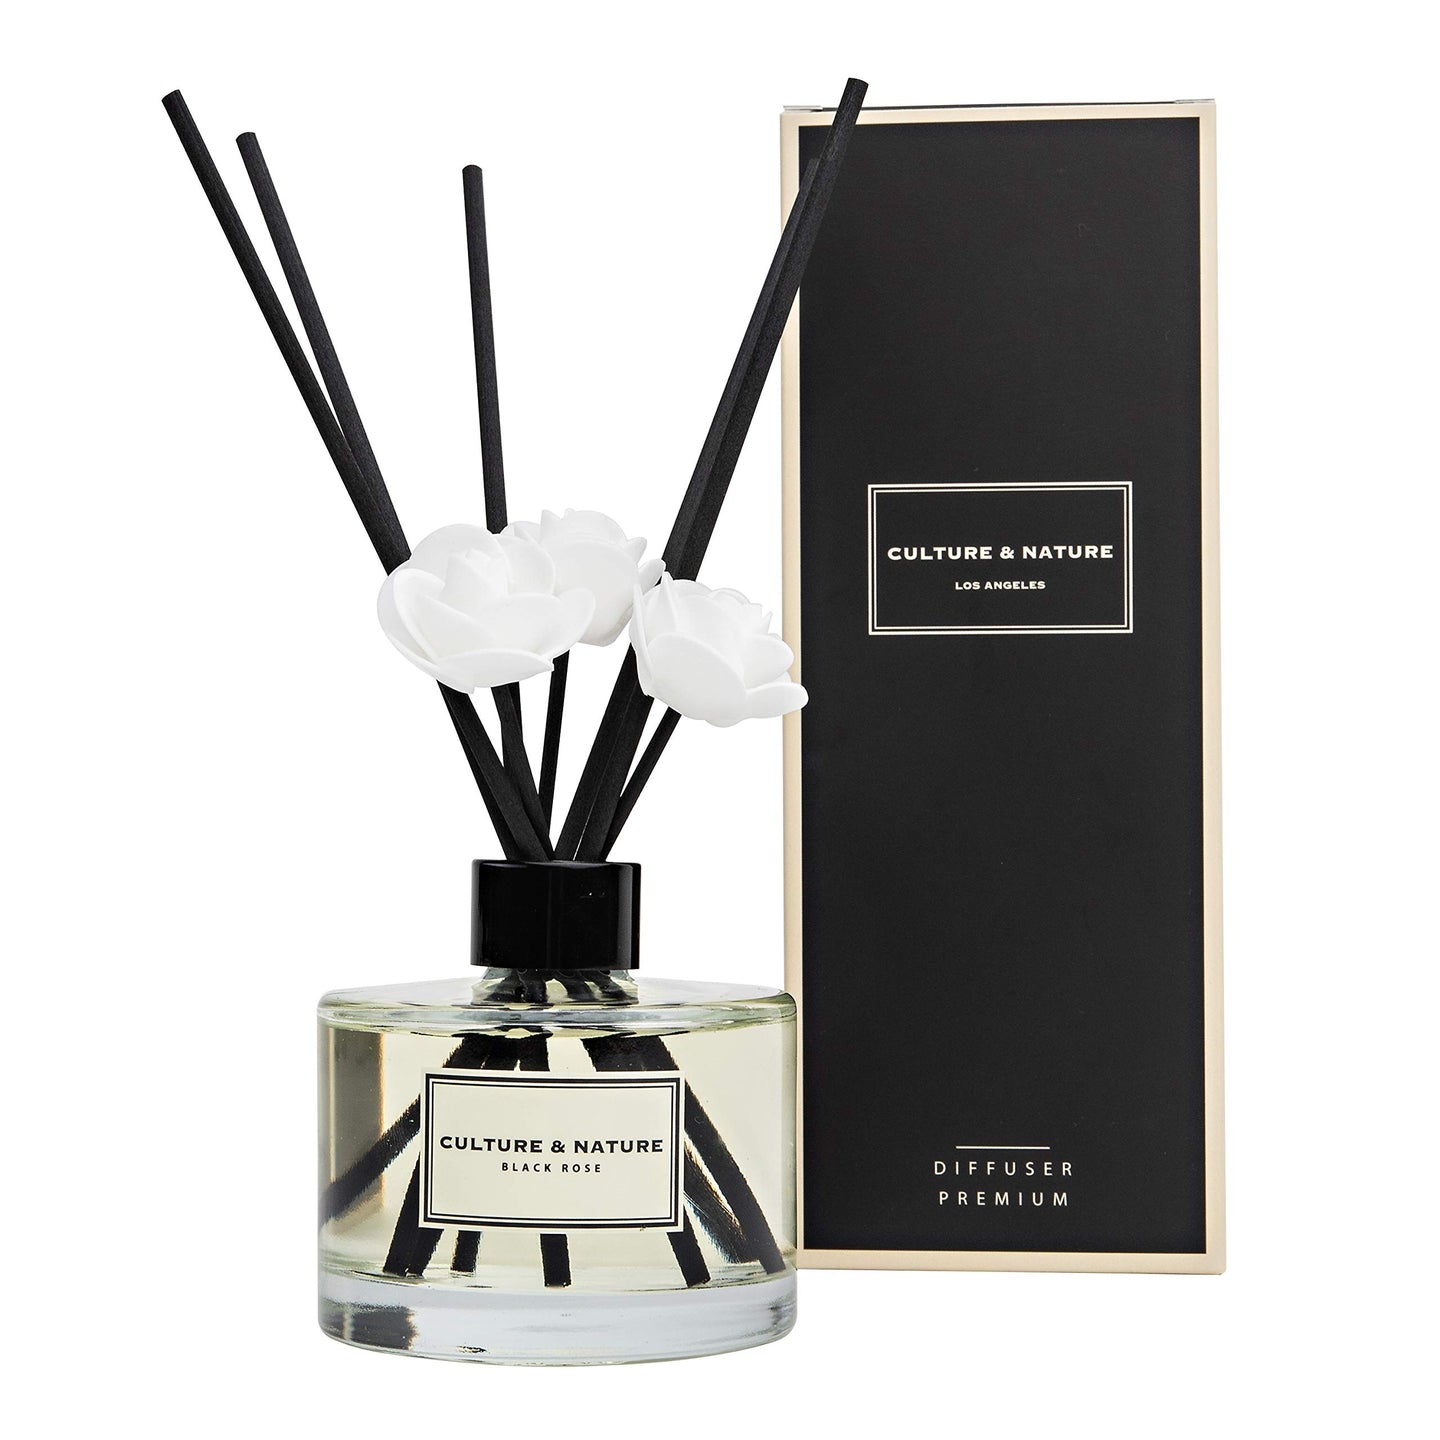 CULTURE & NATURE Reed Diffuser 6.7 oz (200ml) Black Rose Scented Reed Diffuser Set